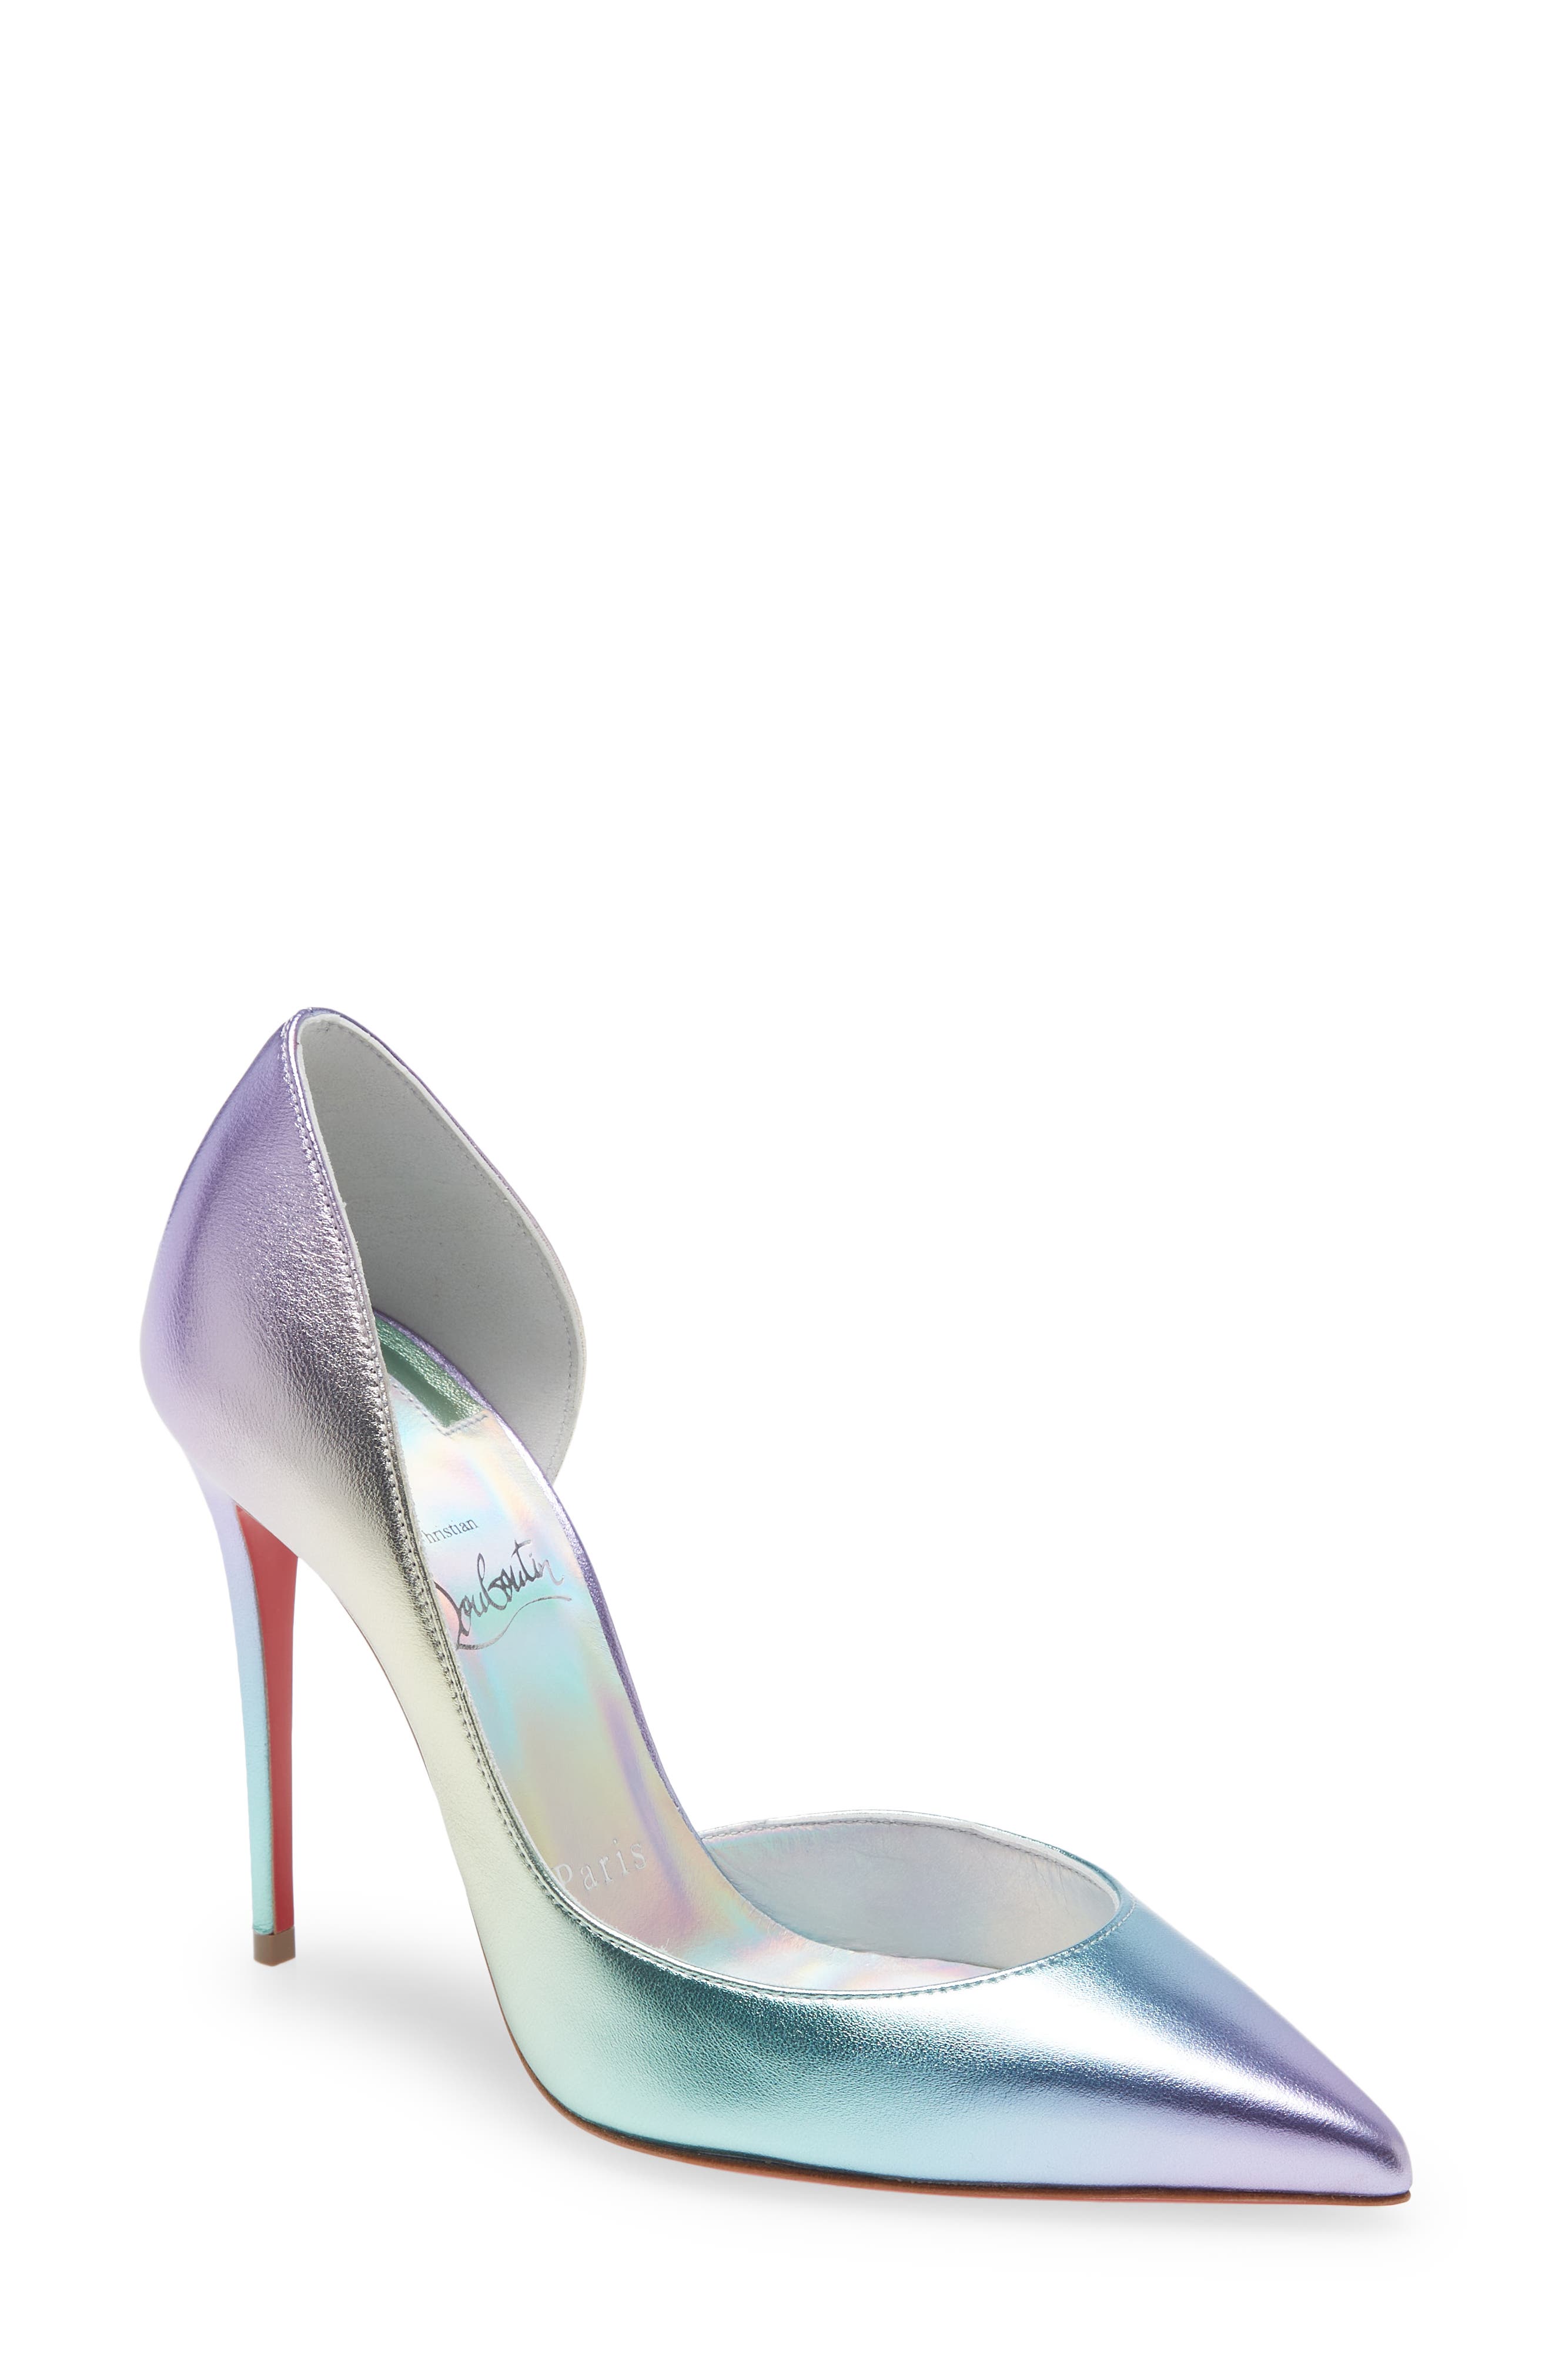 Christian Louboutin Iriza Ombre Pointed Toe Half d'Orsay Pump in Purple at Nordstrom